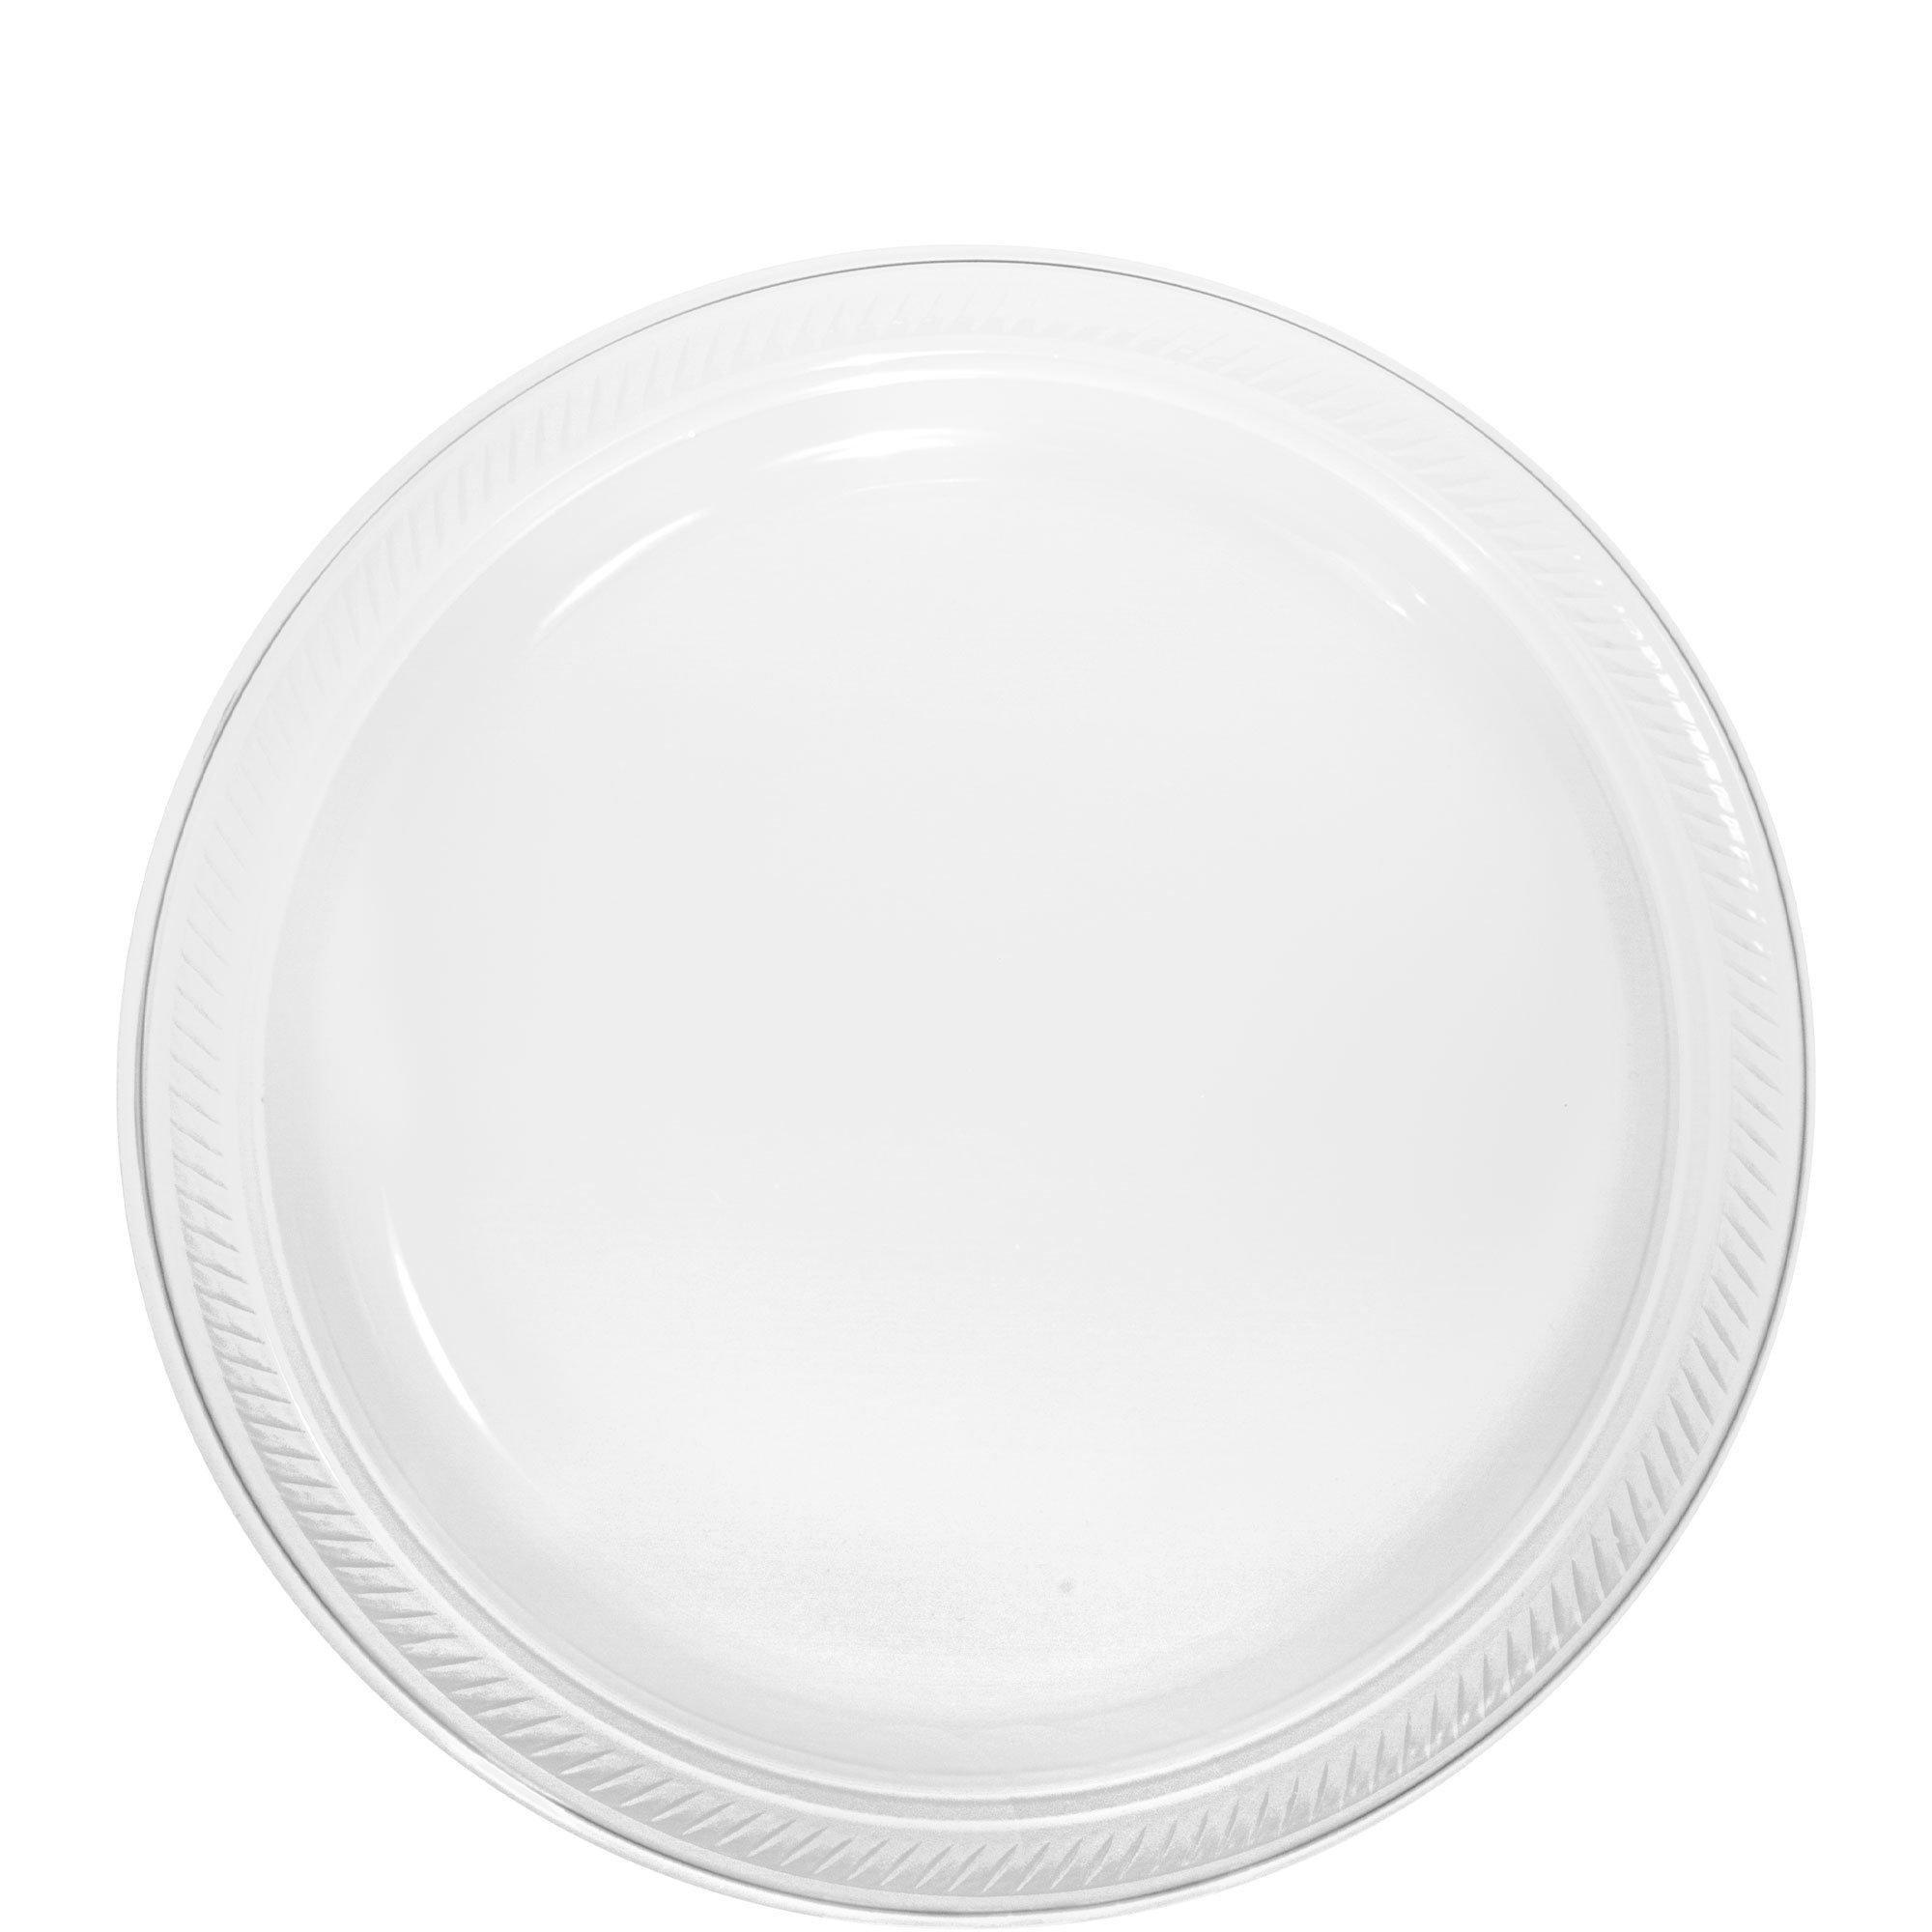 CLEAR Plastic Tableware Kit for 100 Guests | Party City